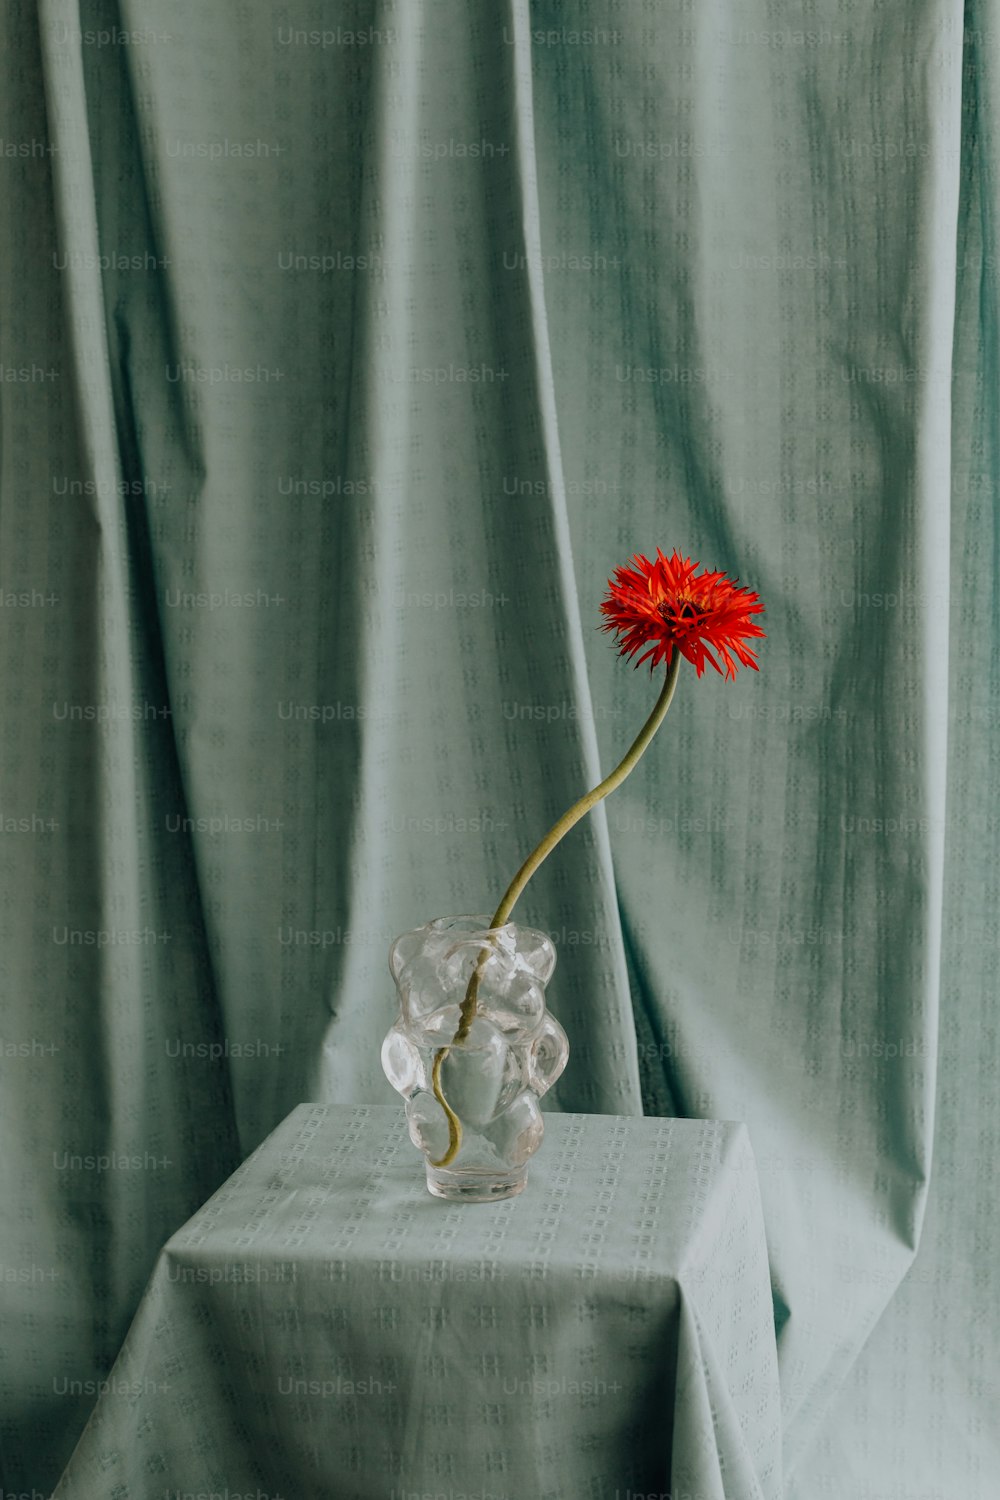 a single red flower in a clear glass vase